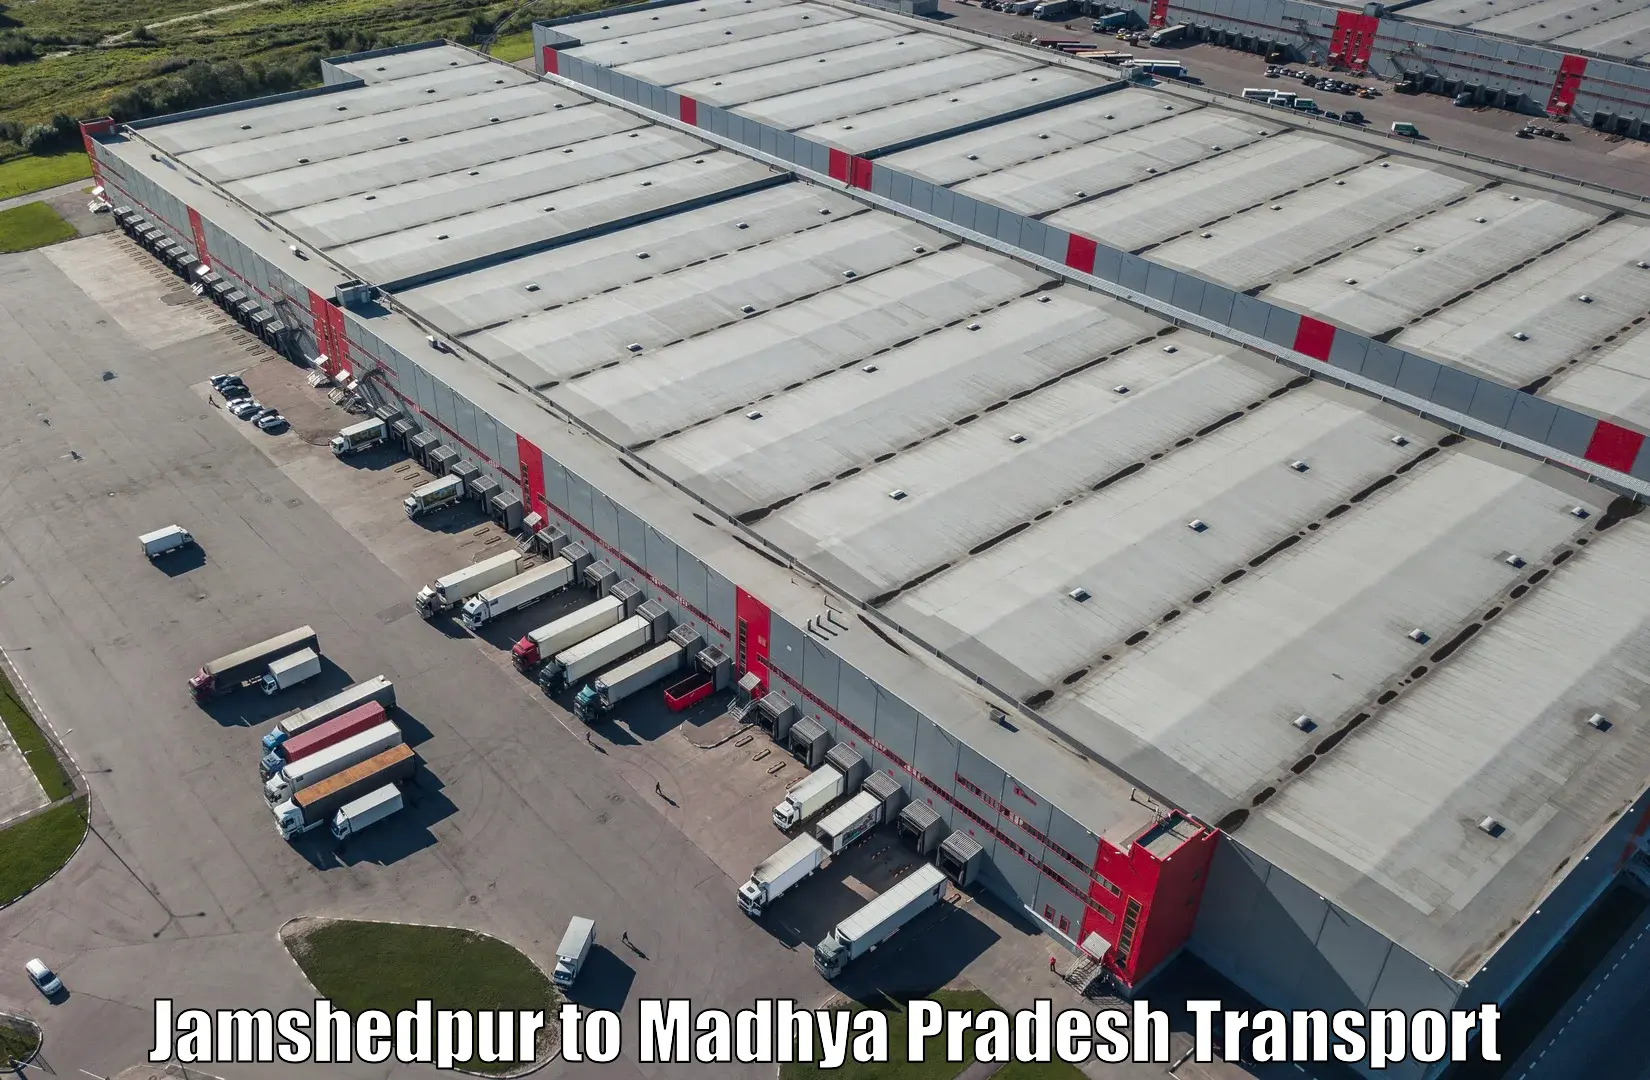 Truck transport companies in India Jamshedpur to Burhar